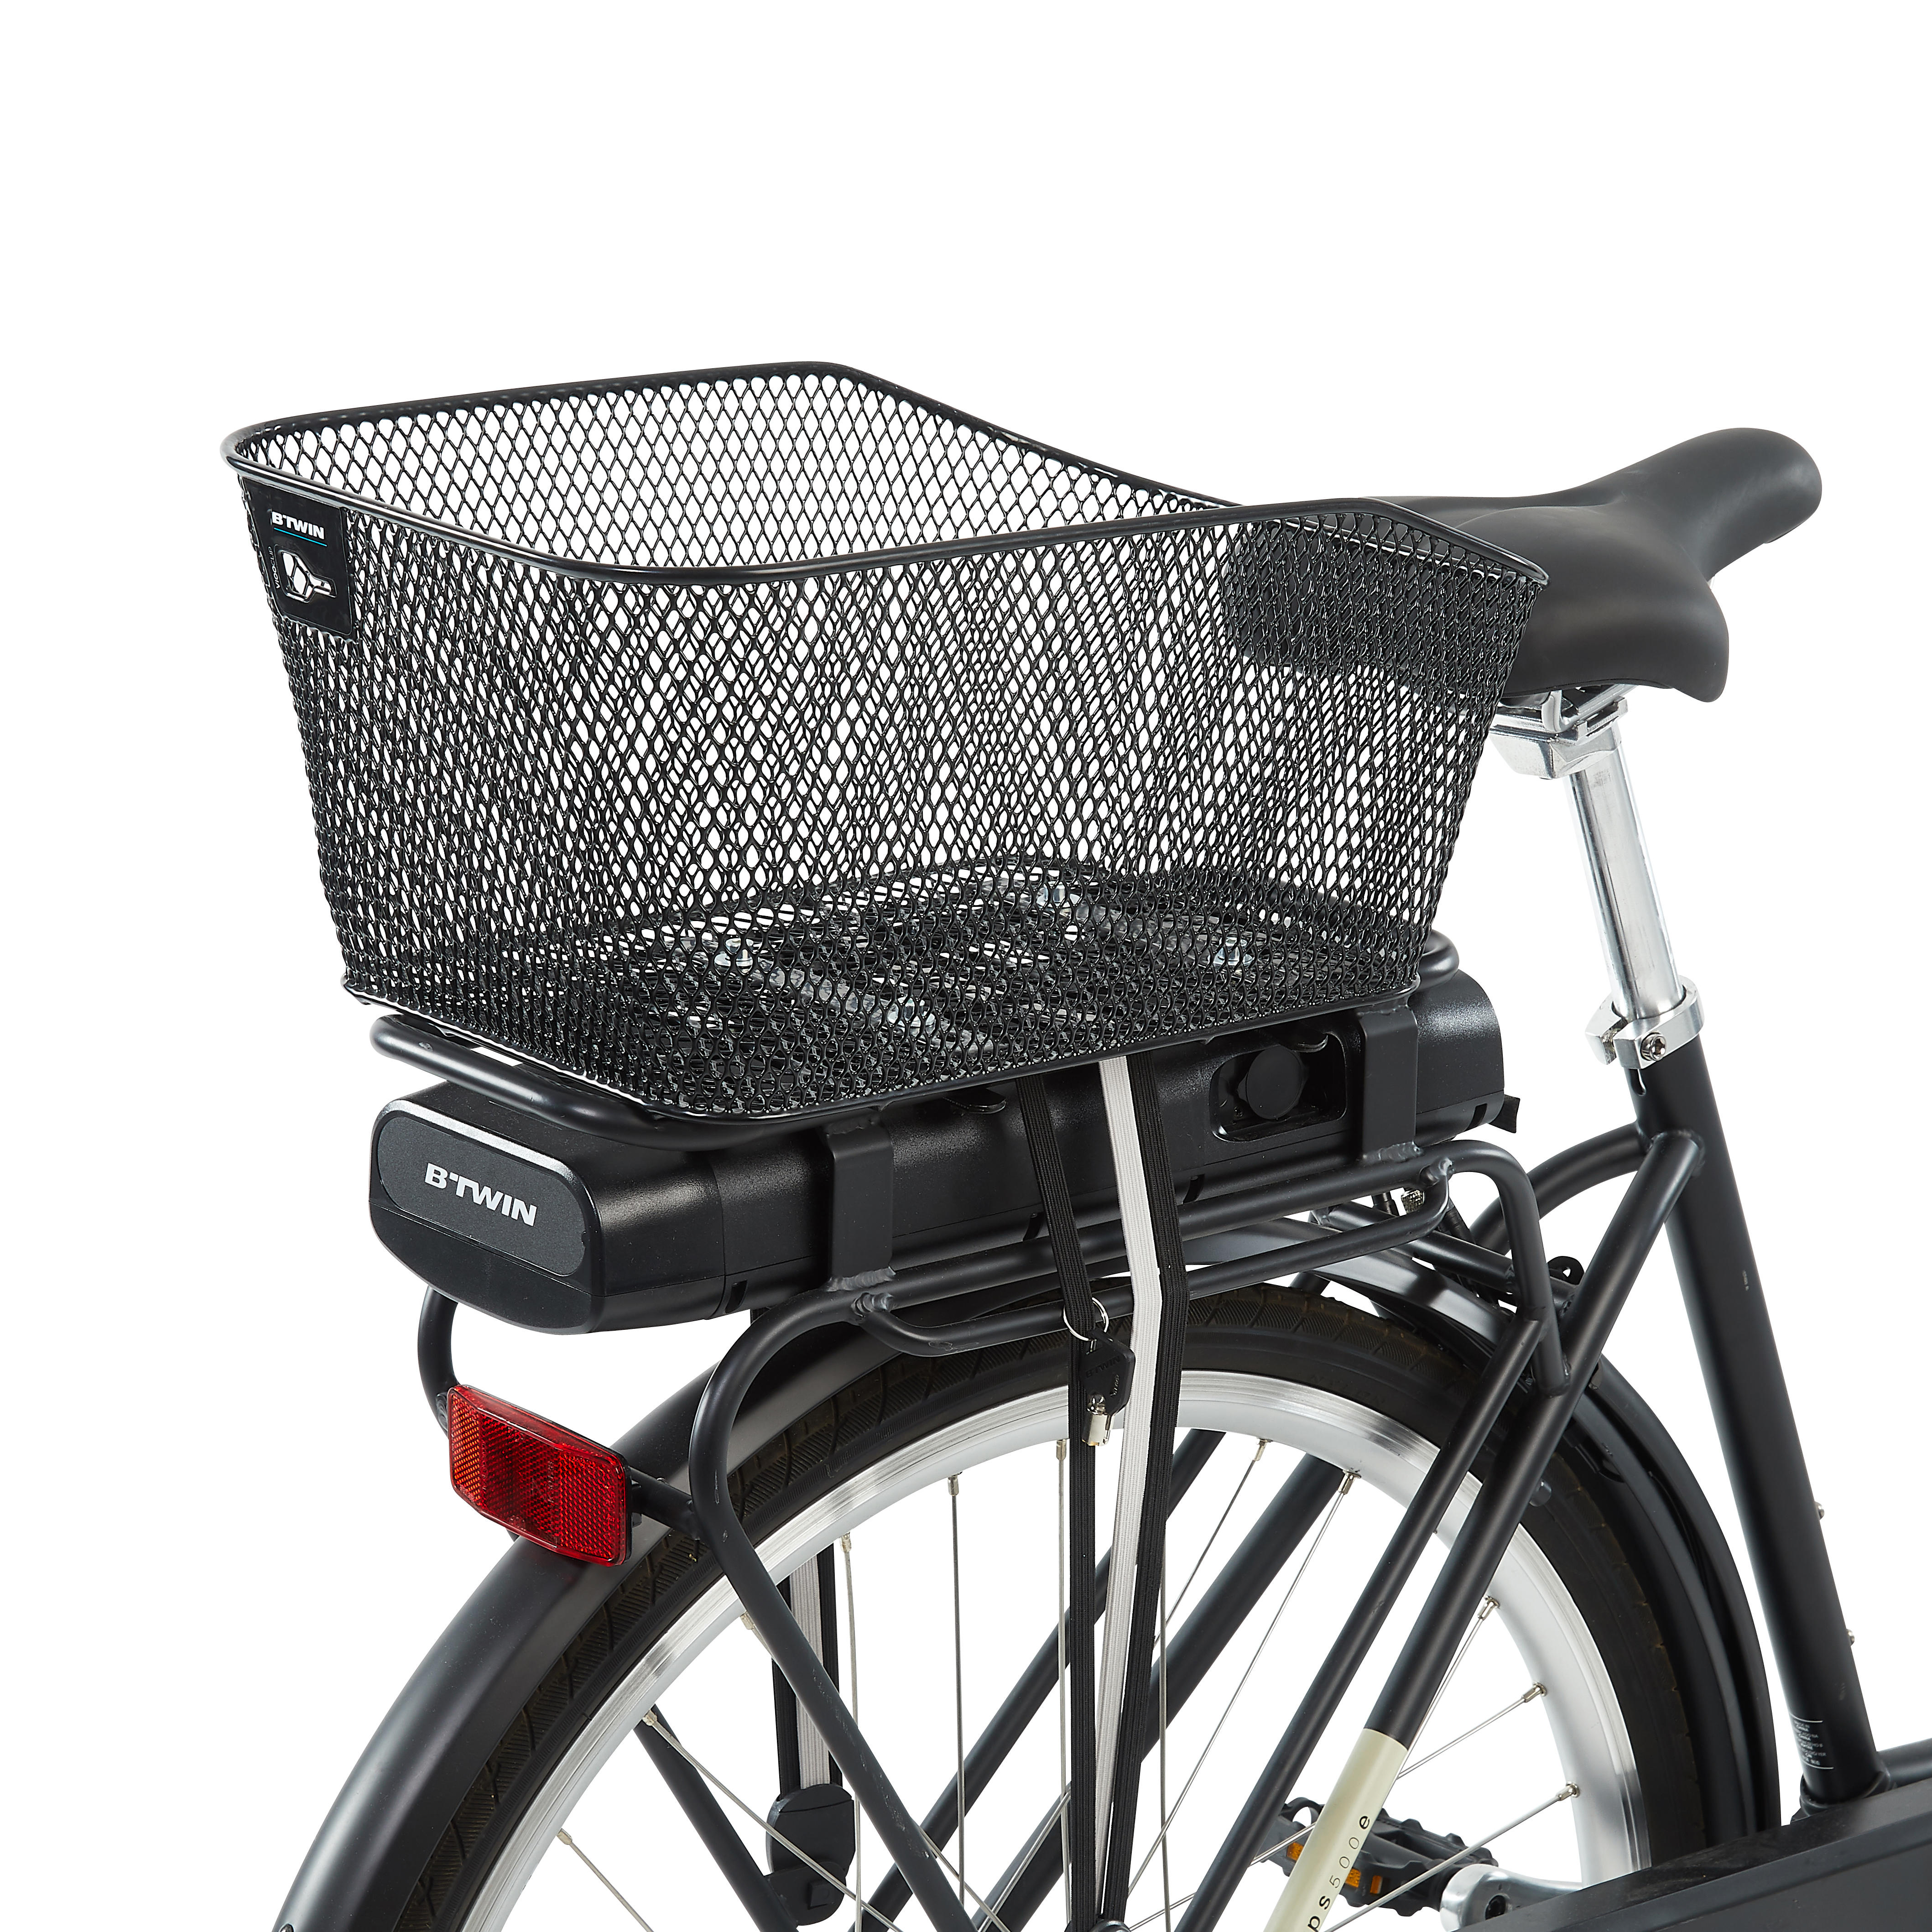 bicycle baskets for back of bike